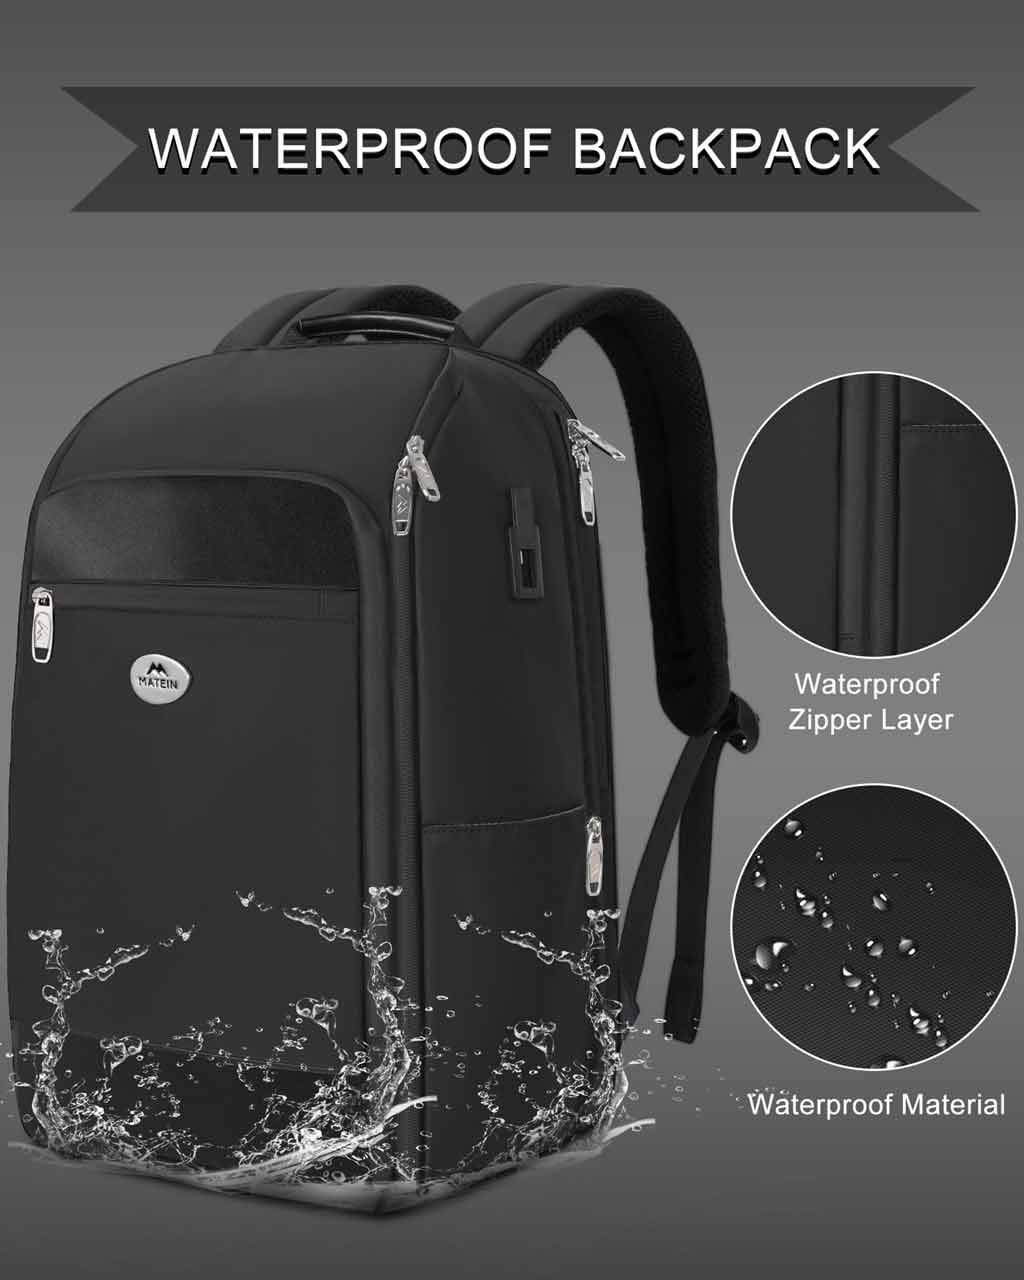 MATEIN Business Travel Backpack